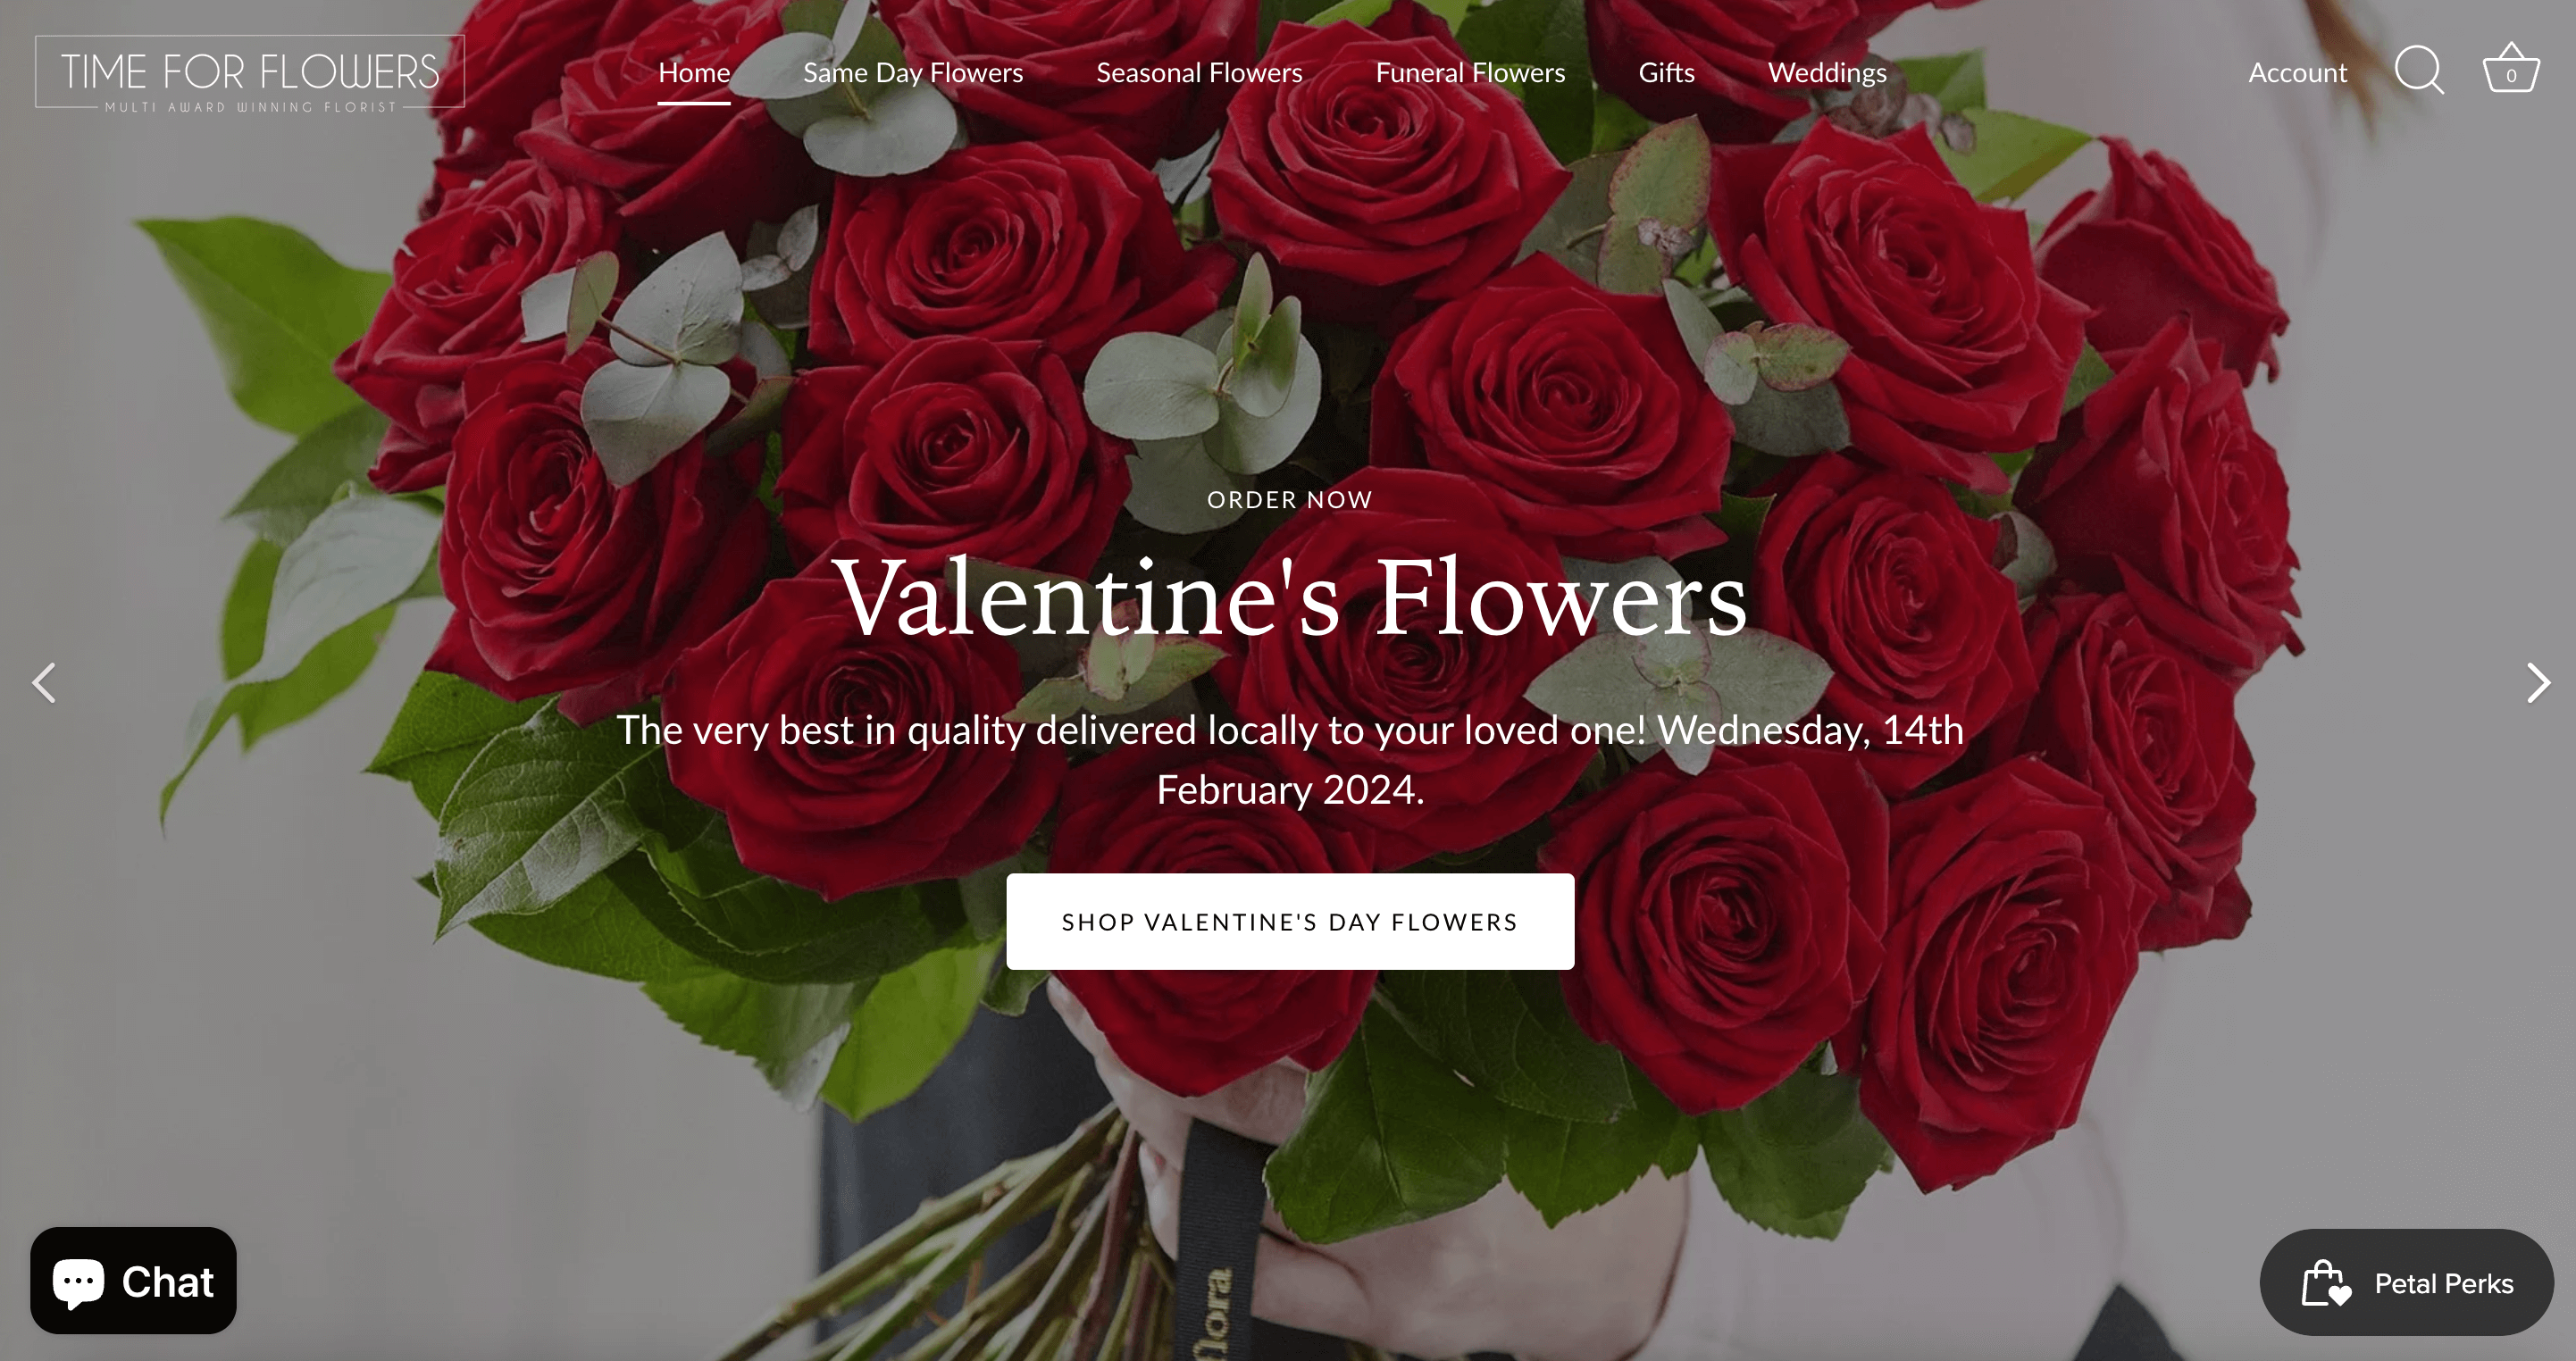 Valentine’s Day Gift Guide–A screenshot from Time For Flowers’ website homepage. The banner image features its Valentine’s Flowers collection and shows a bouquet of red roses. 